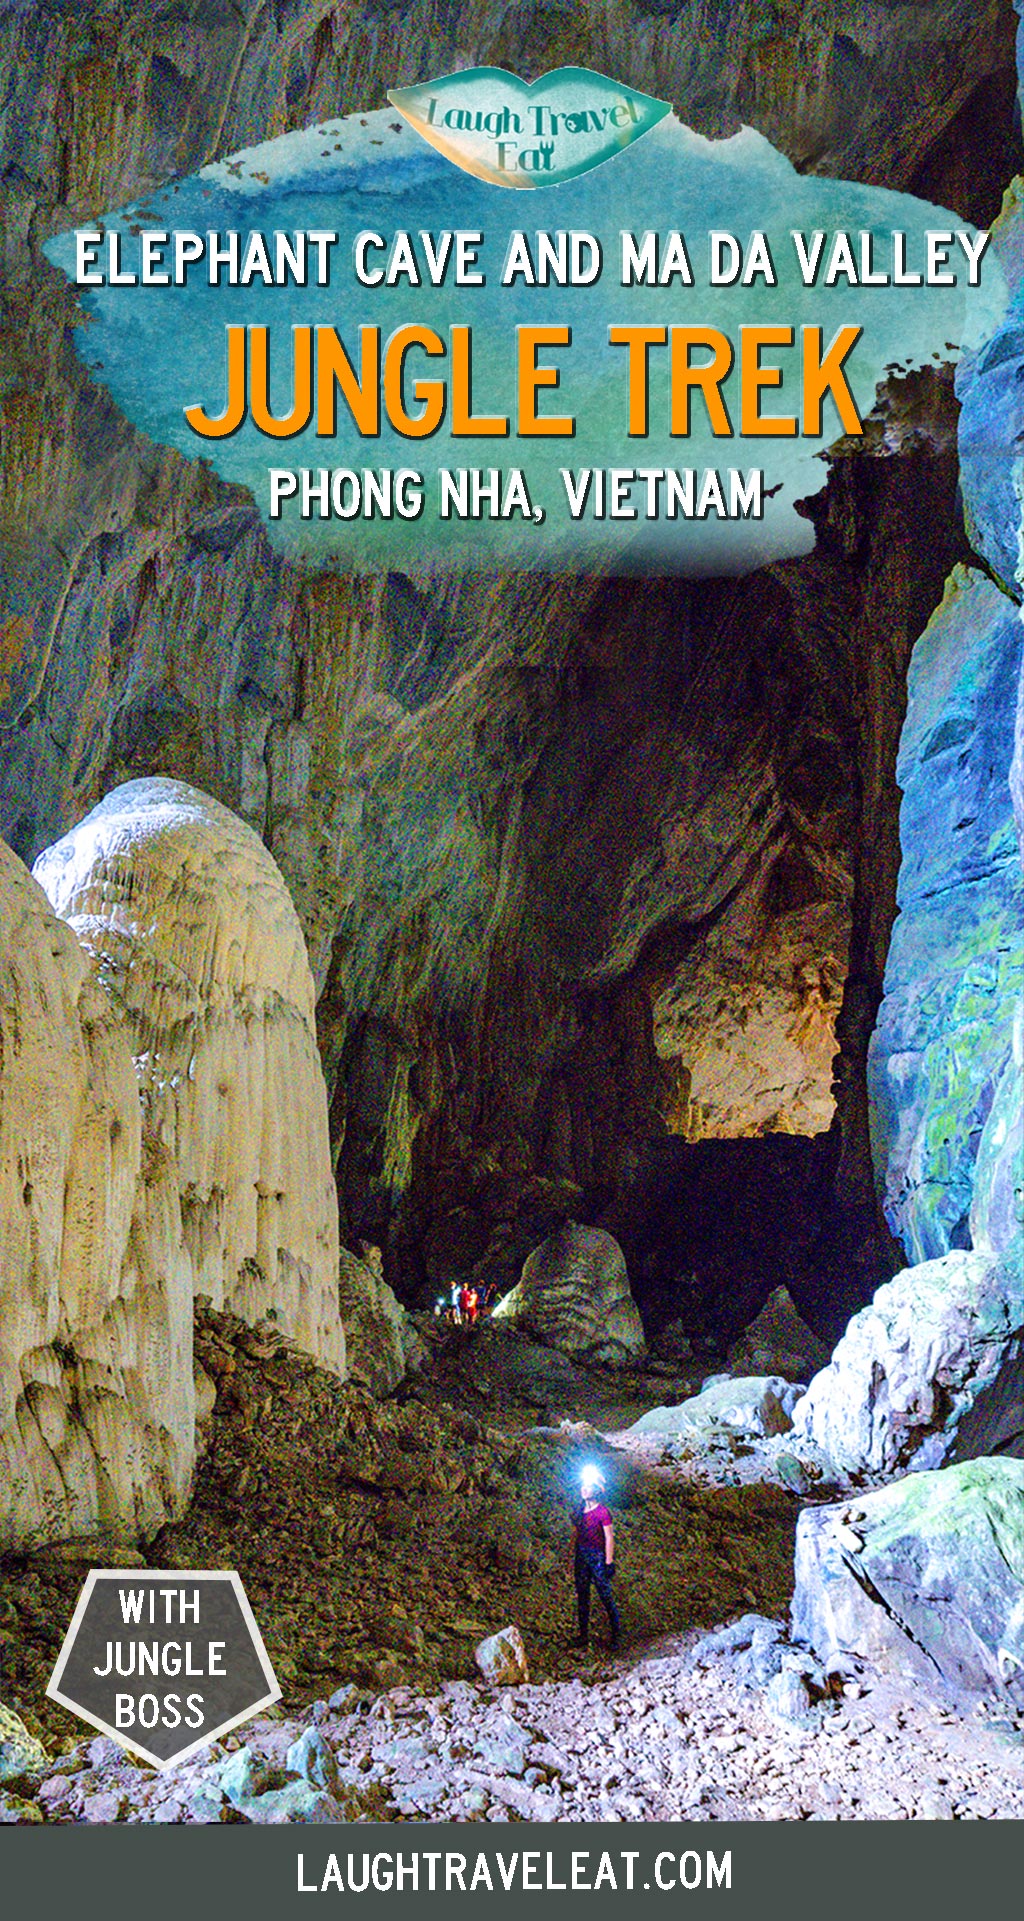 Aside from visiting the caves in Phong Nha, Vietnam, jungle trekking is a popular activity. If you are looking for something a little more adventurous, I highly recommend Elephant Cave and Ma Da Valley day trek by Jungle Boss. Here is why: #PhongNha #Vietnam #JungleTrek #Trek